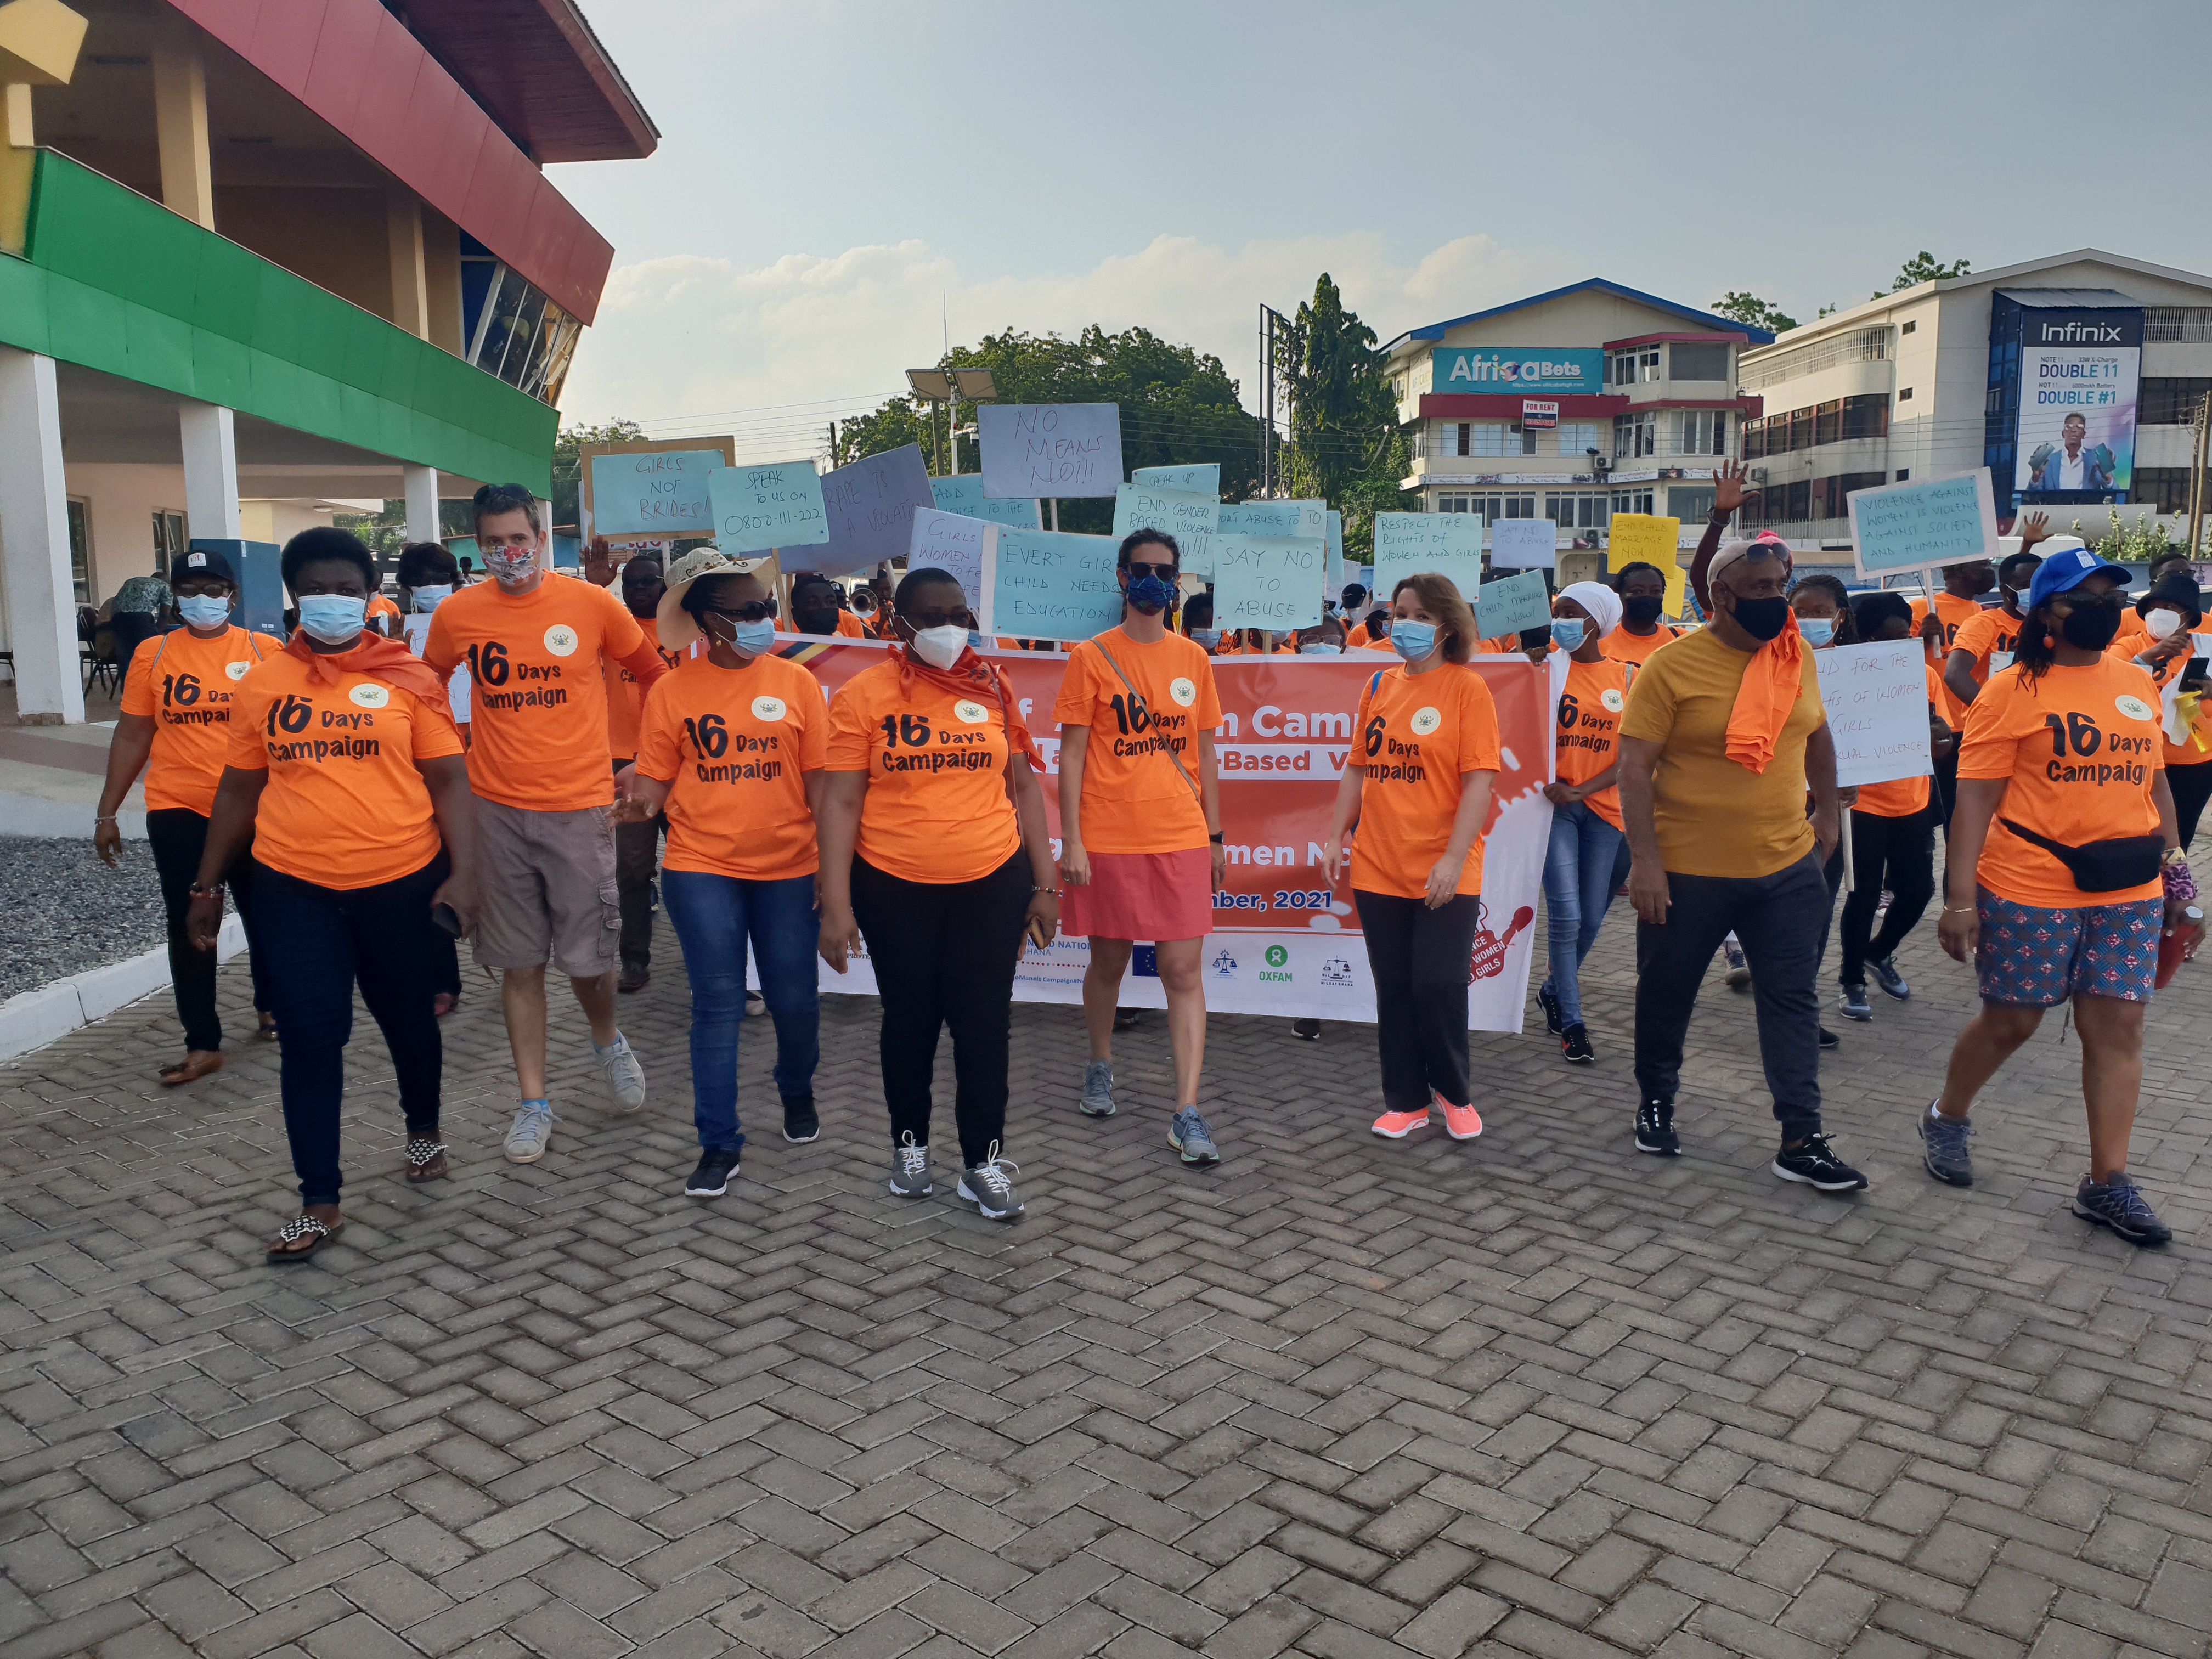 'Oranging' the Streets of Accra with One Message: “Stop SGB Violence”